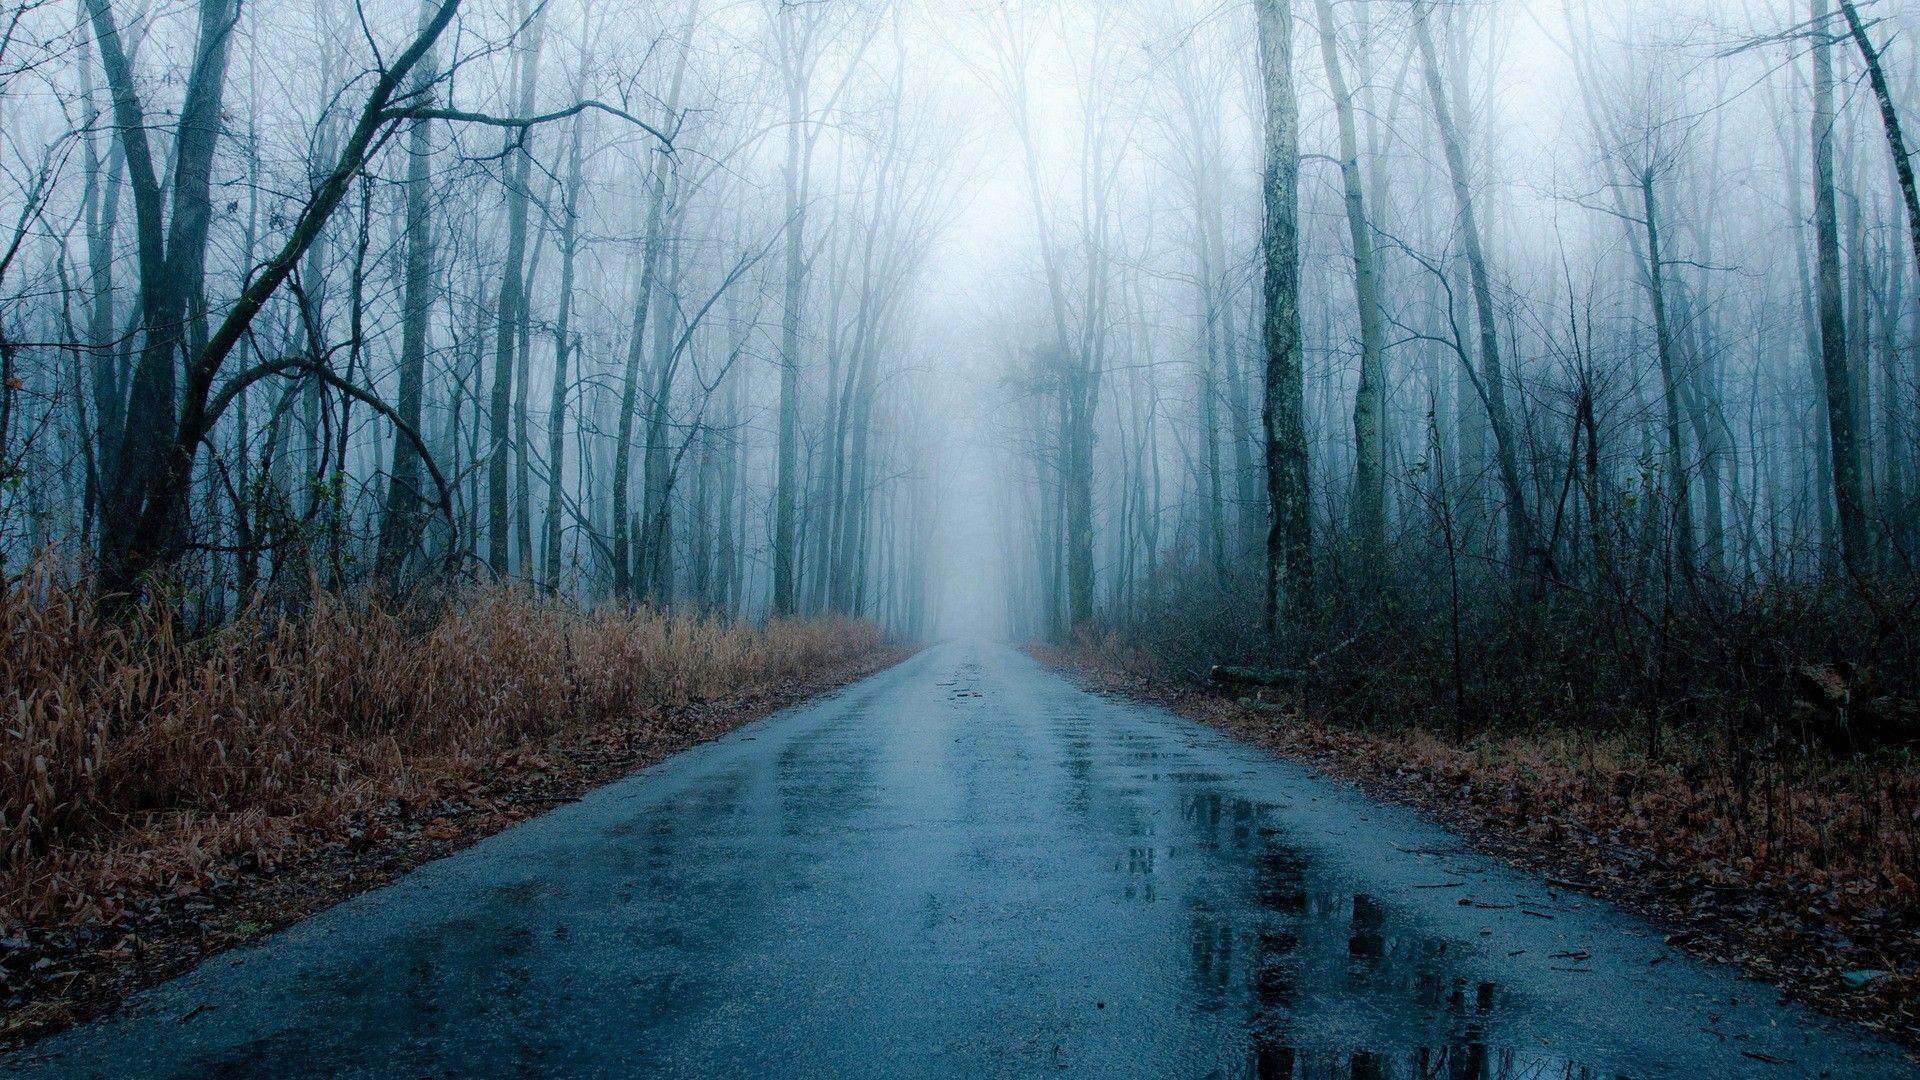 Foggy, rainy road in winter. It's About Nature. Autumn